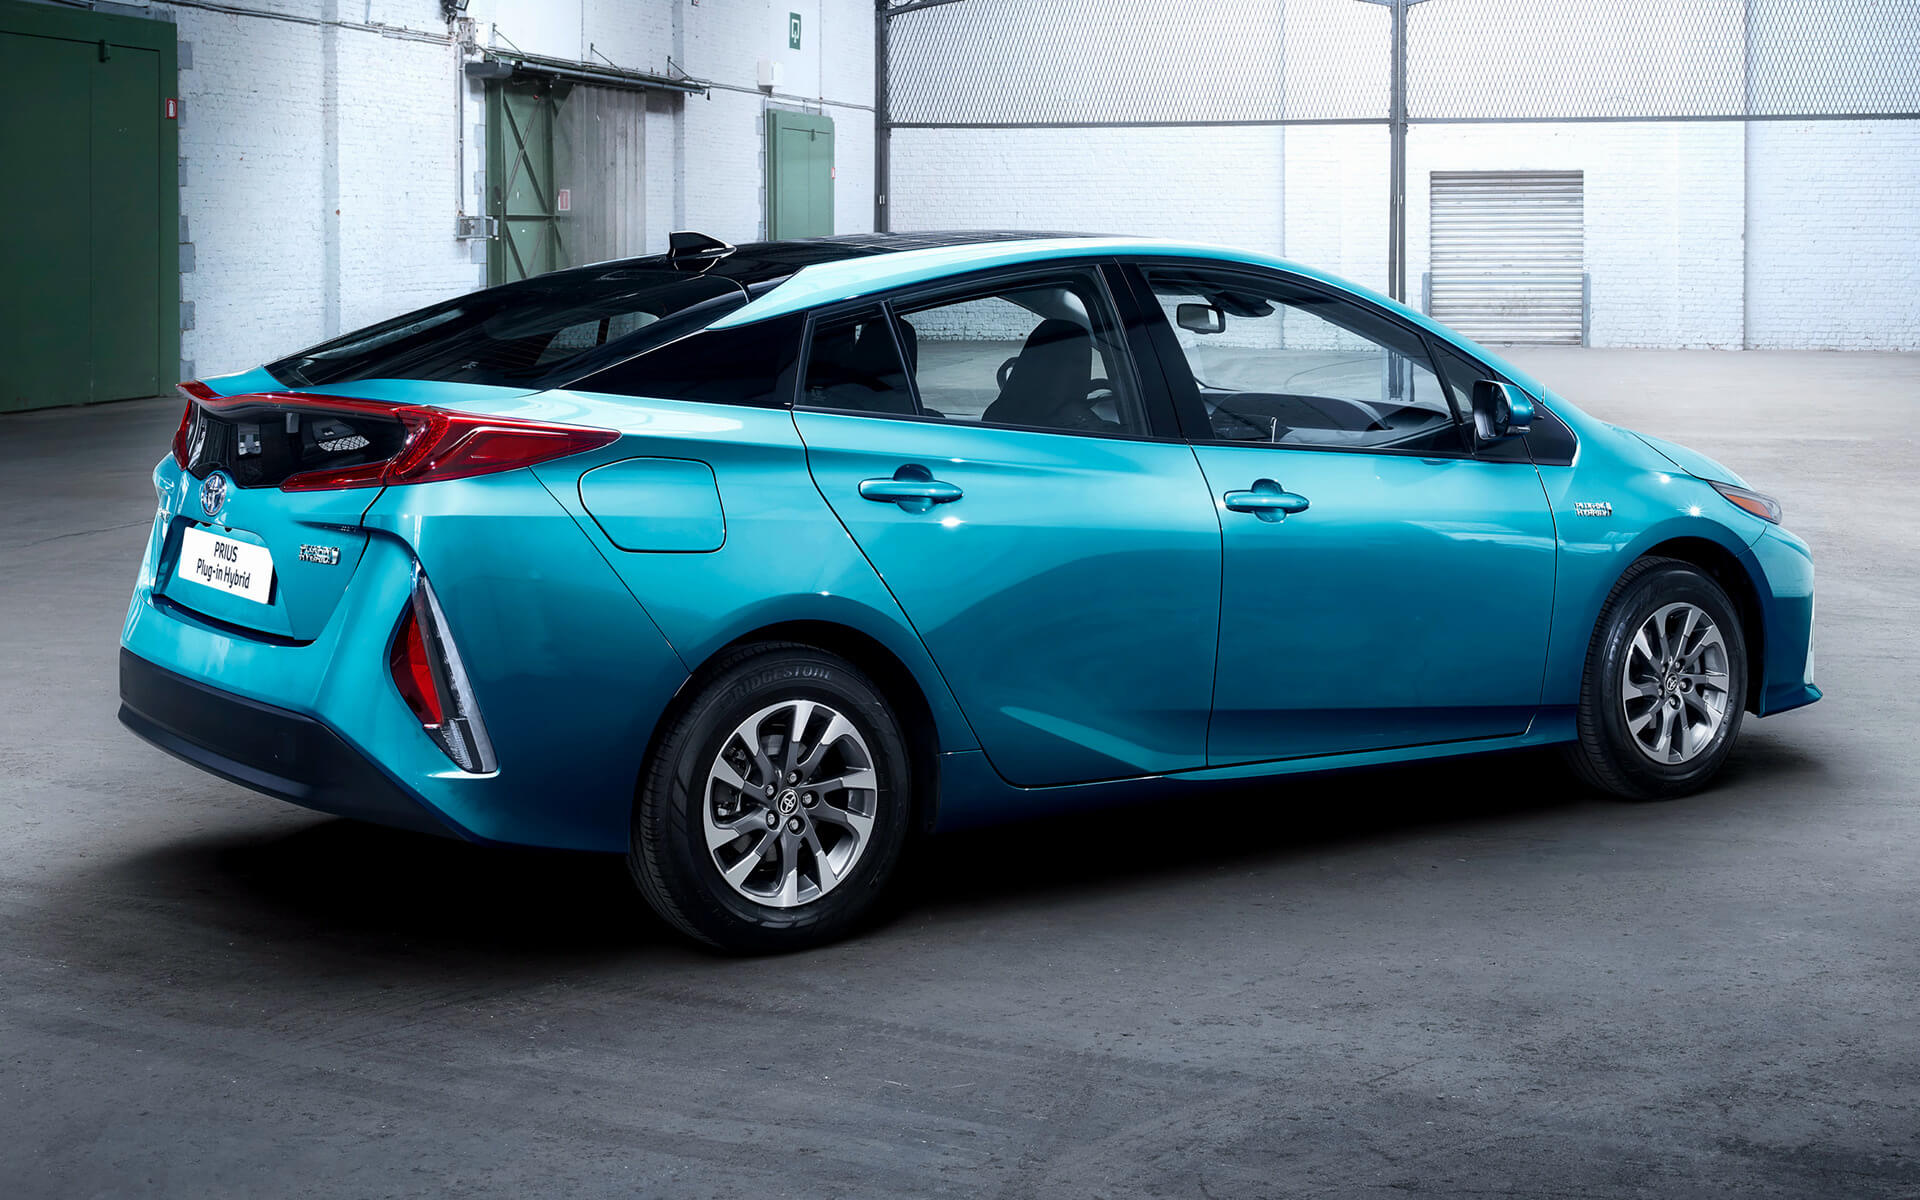 The new Toyota Prius will become a Plug-in hybrid